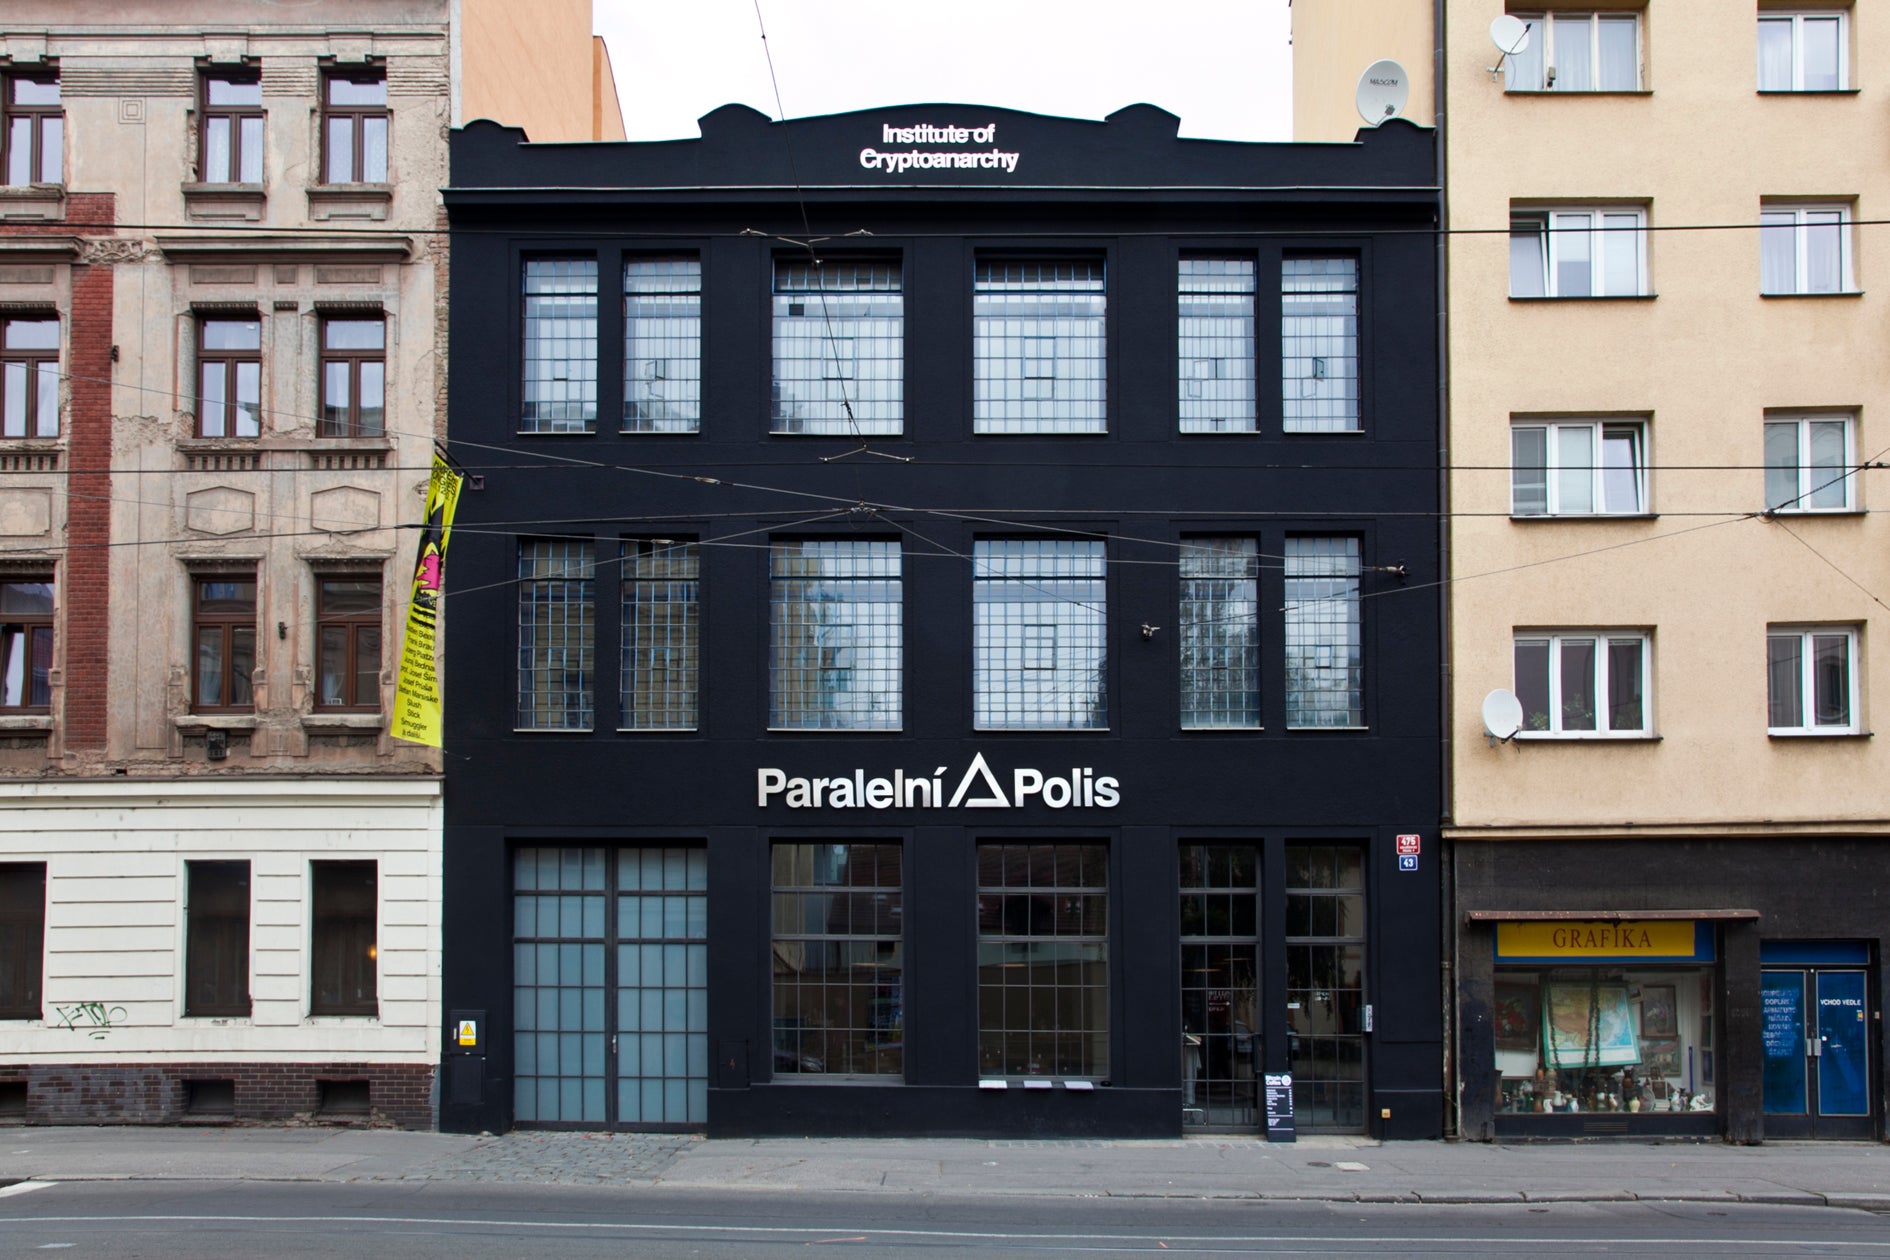 Paralelní Polis is the headquarters for the Ztohoven collective